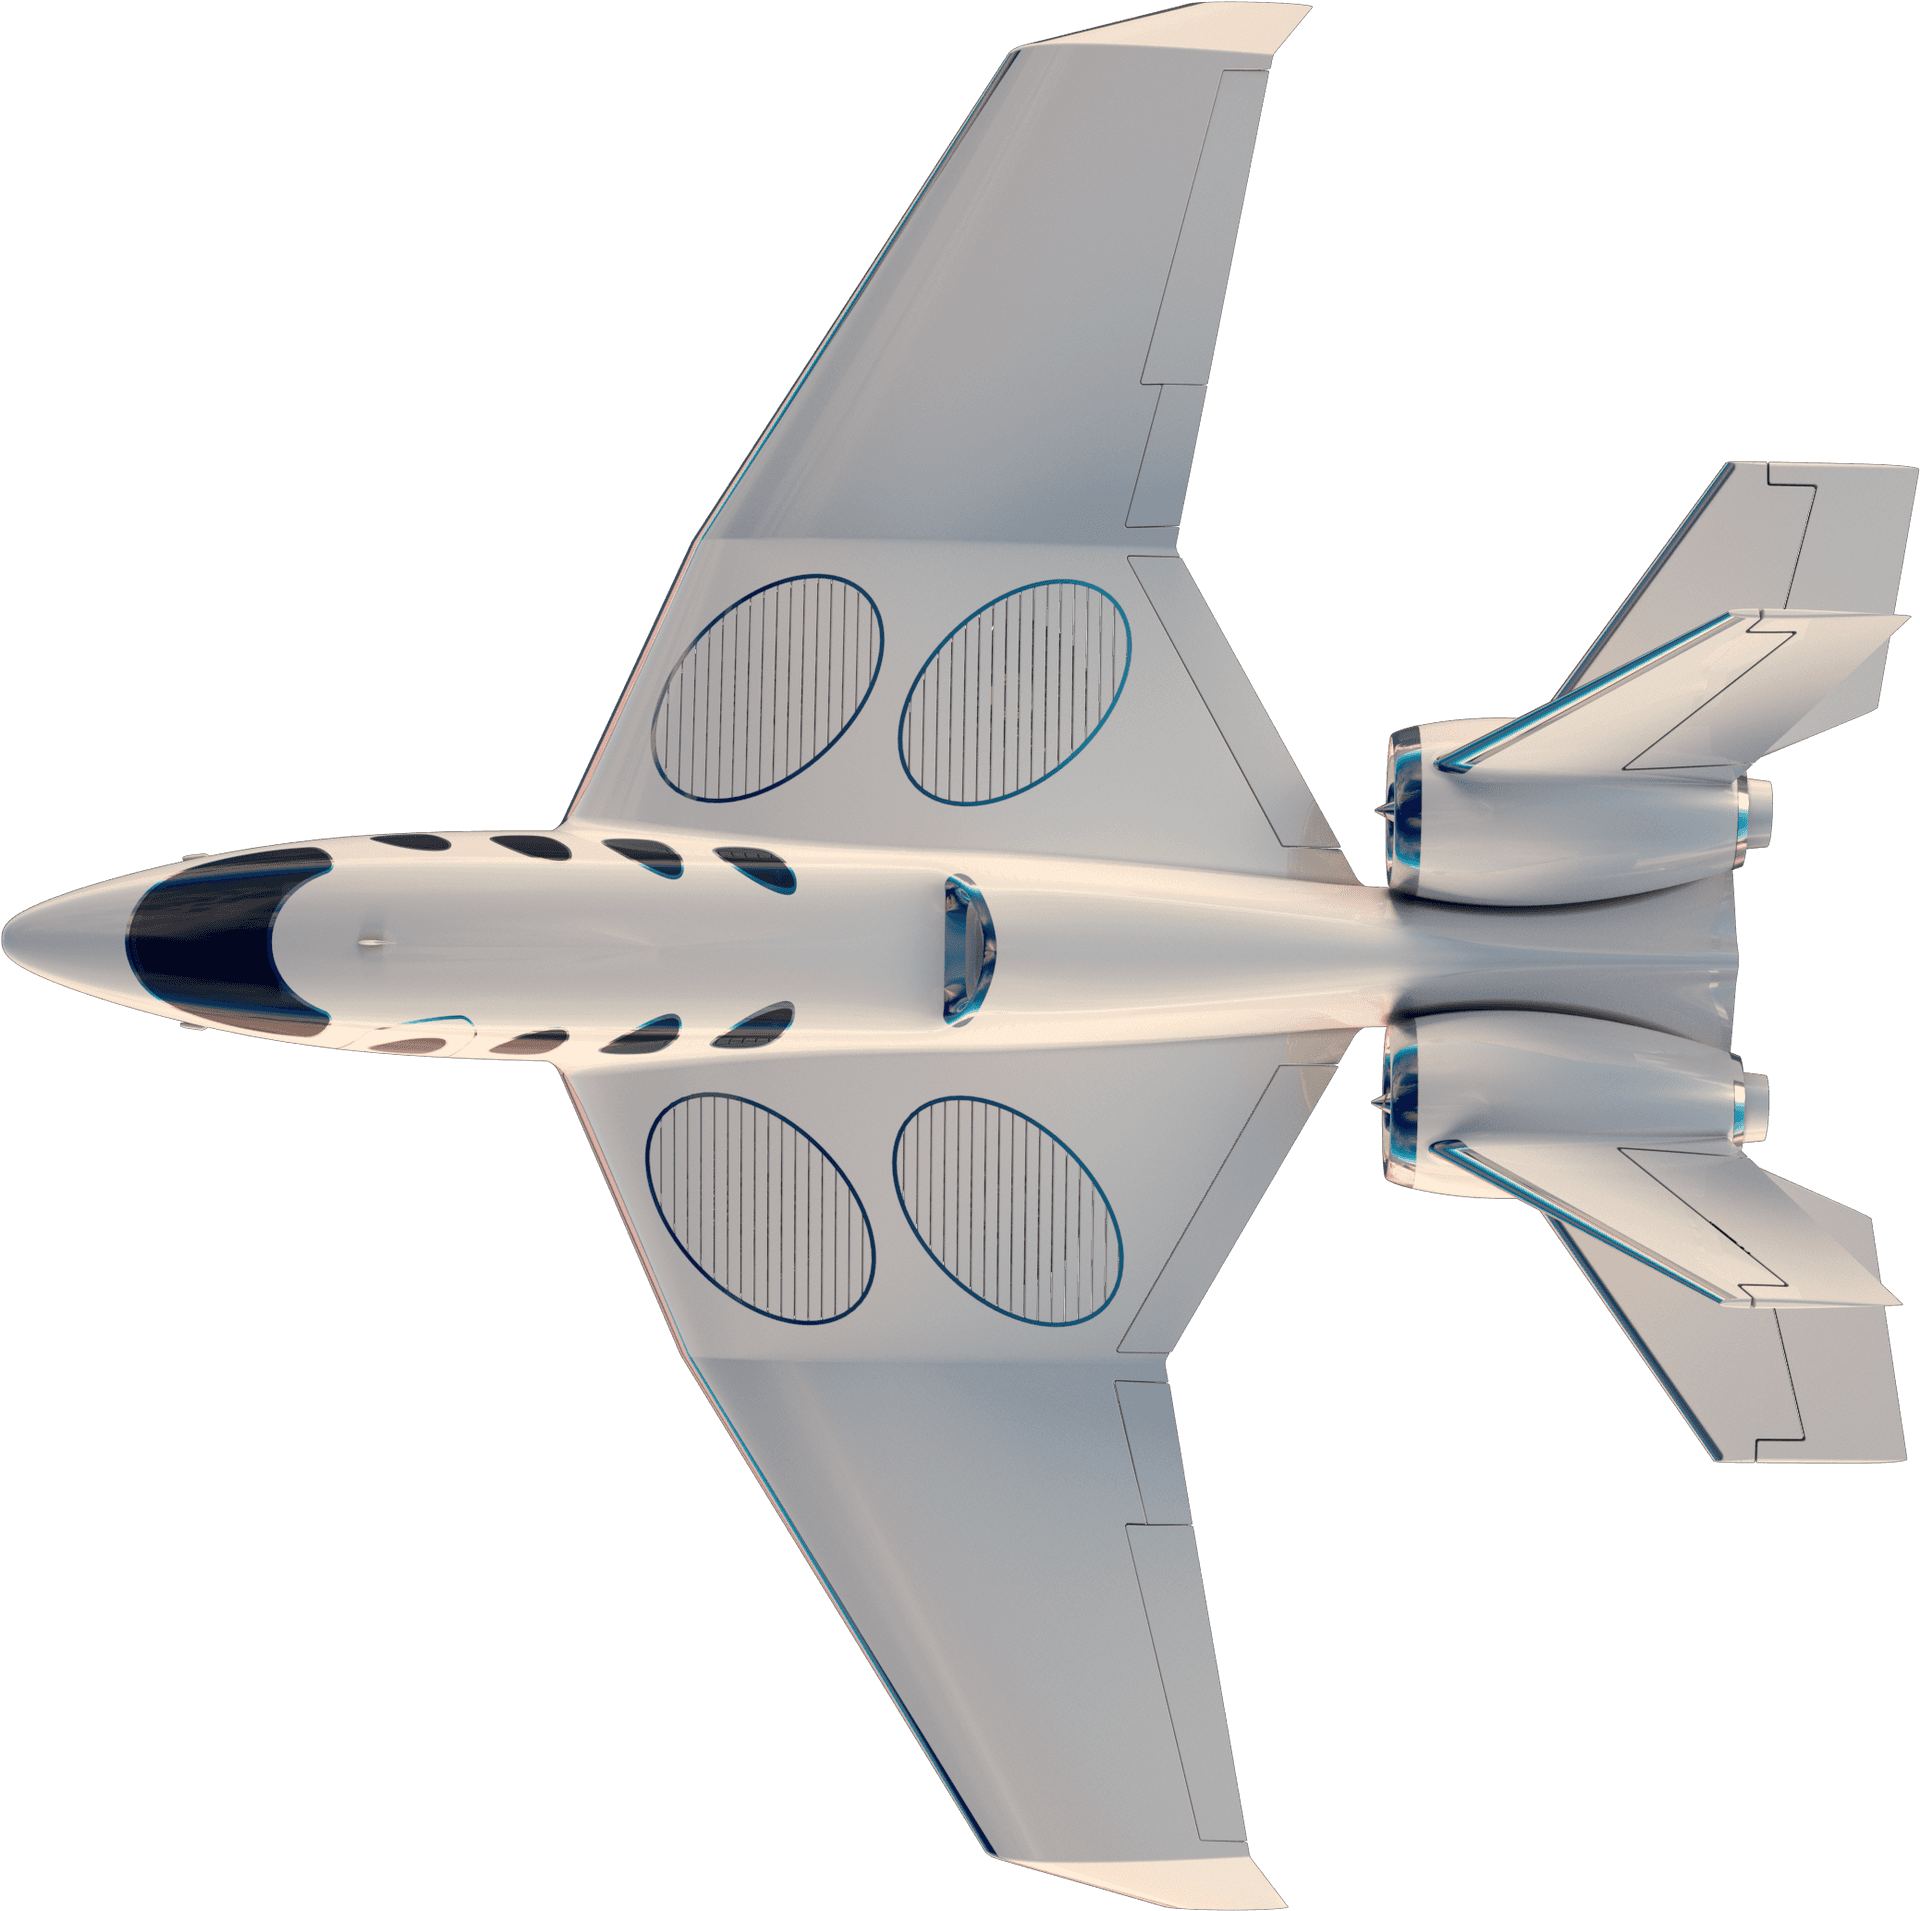 Futuristic Jet Fighter Concept PNG